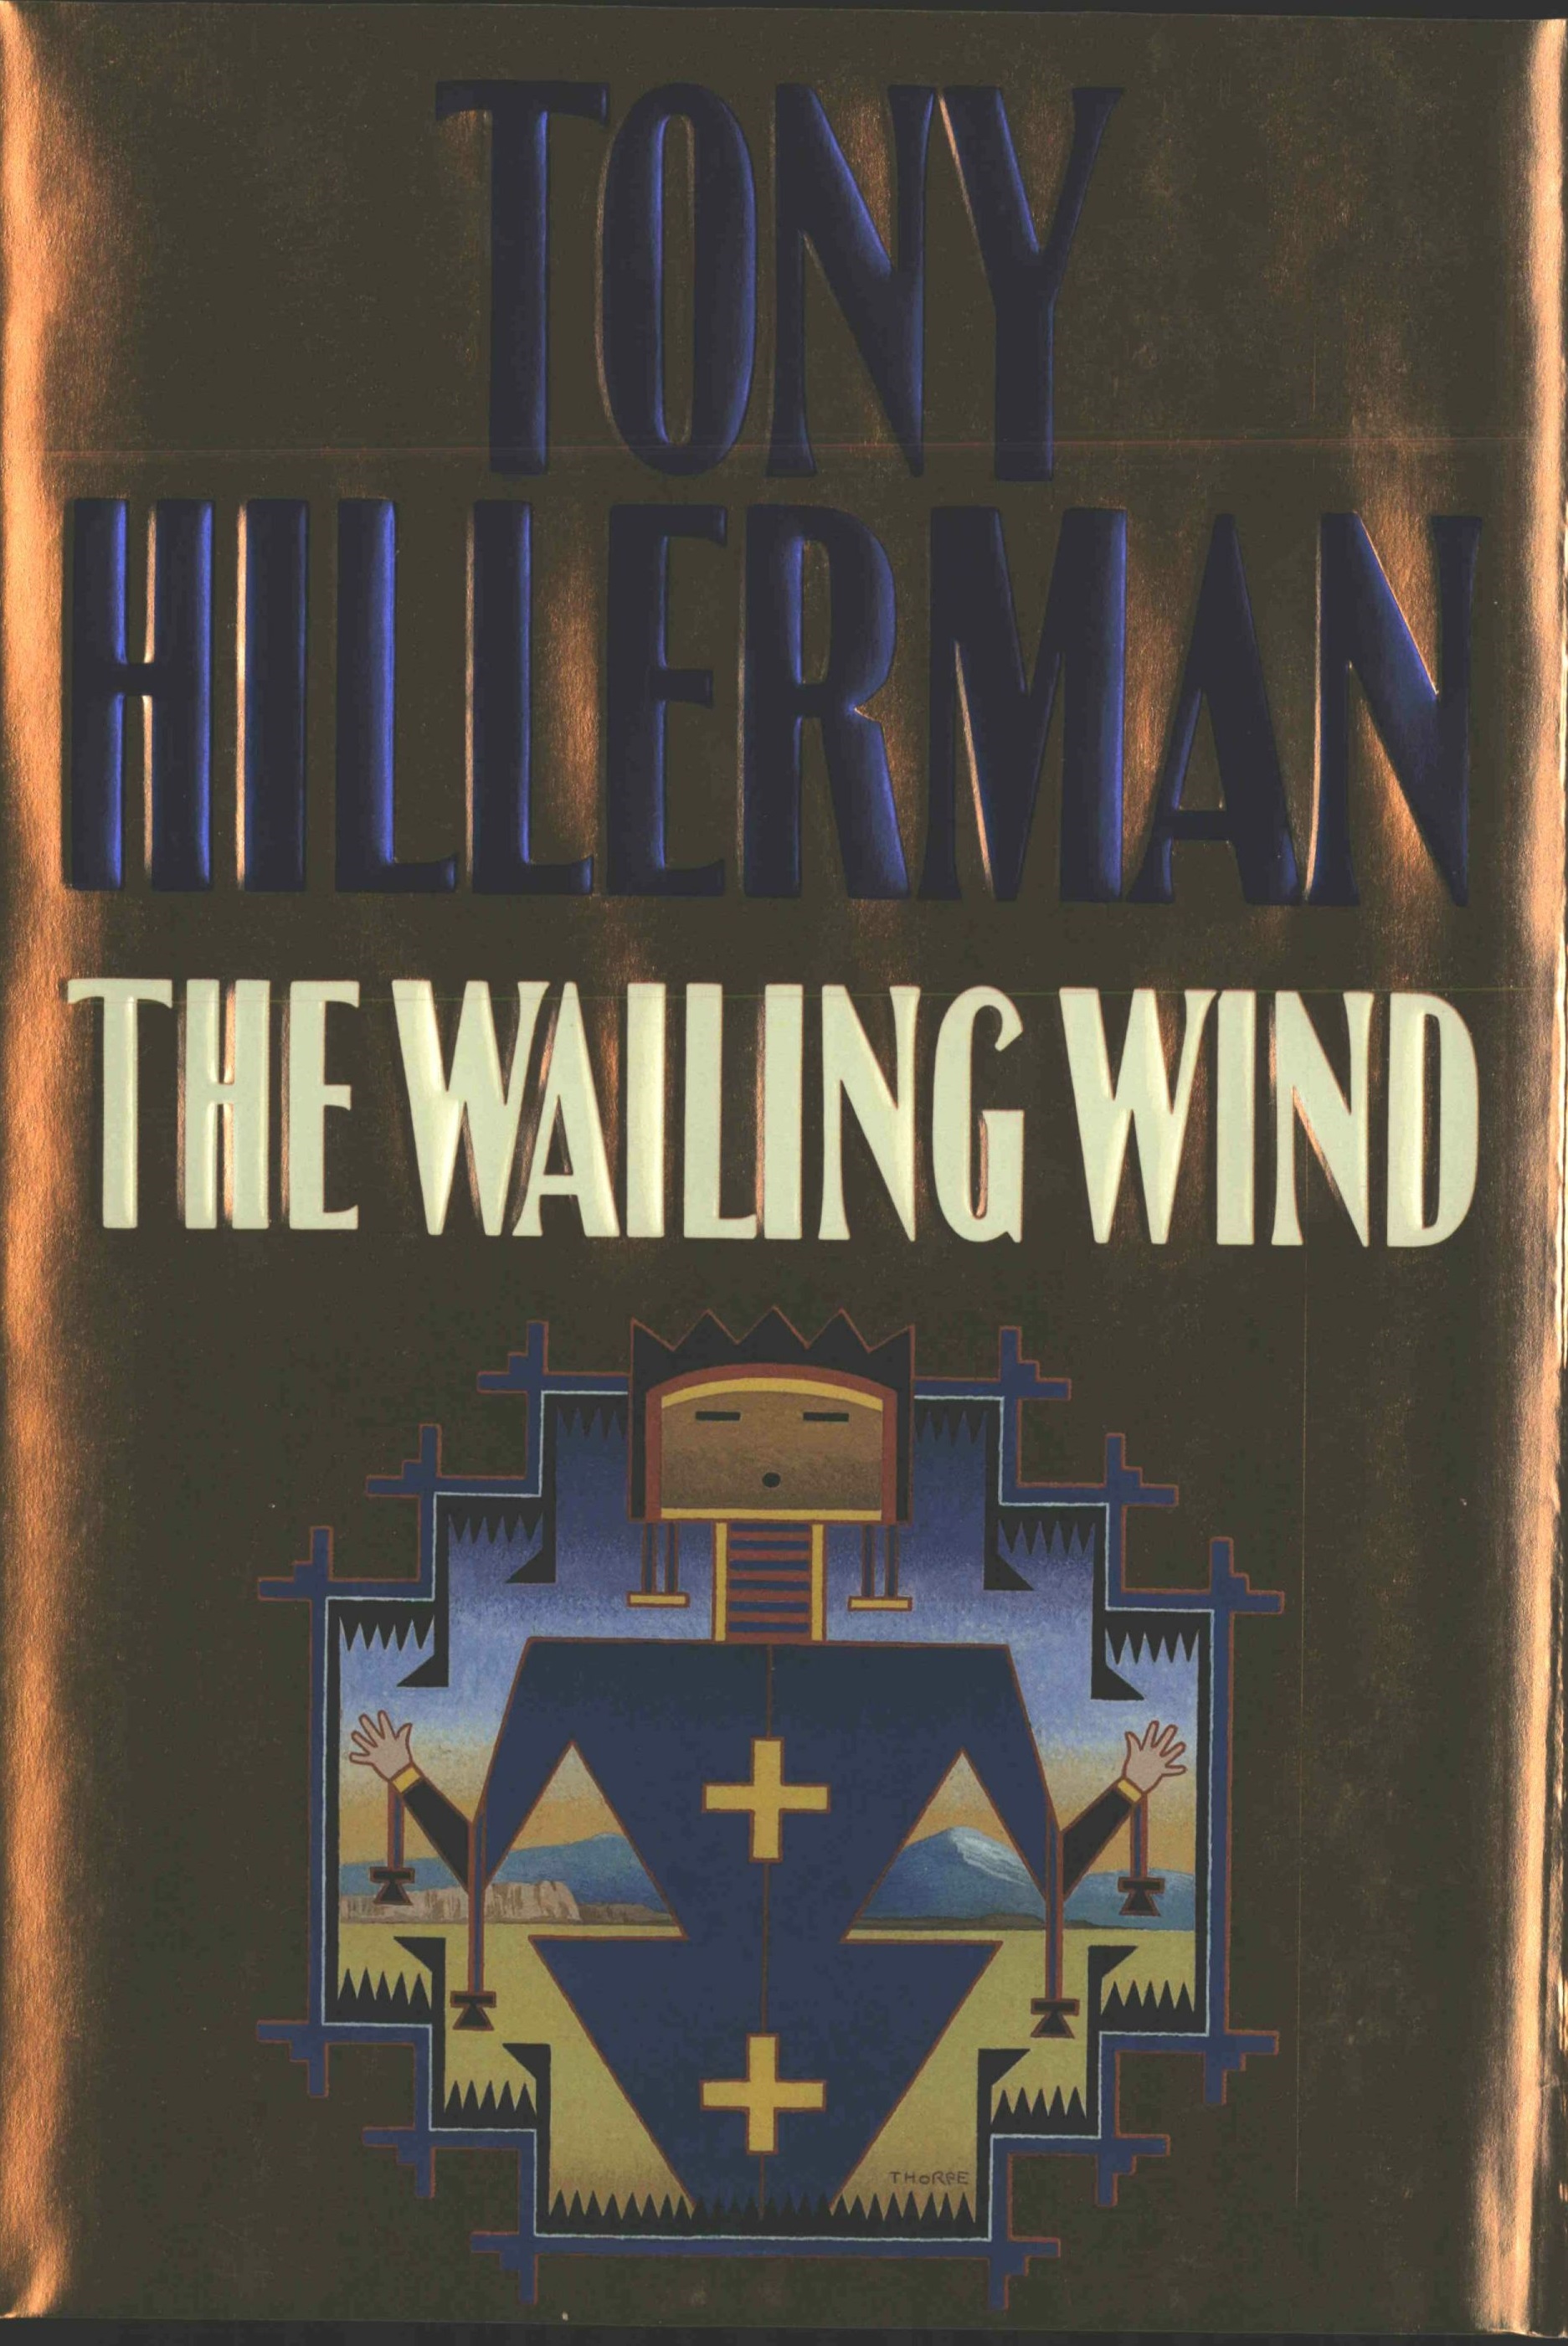 The Wailing Wind [First Edition, hardback, 2002] | The Tony Hillerman ...